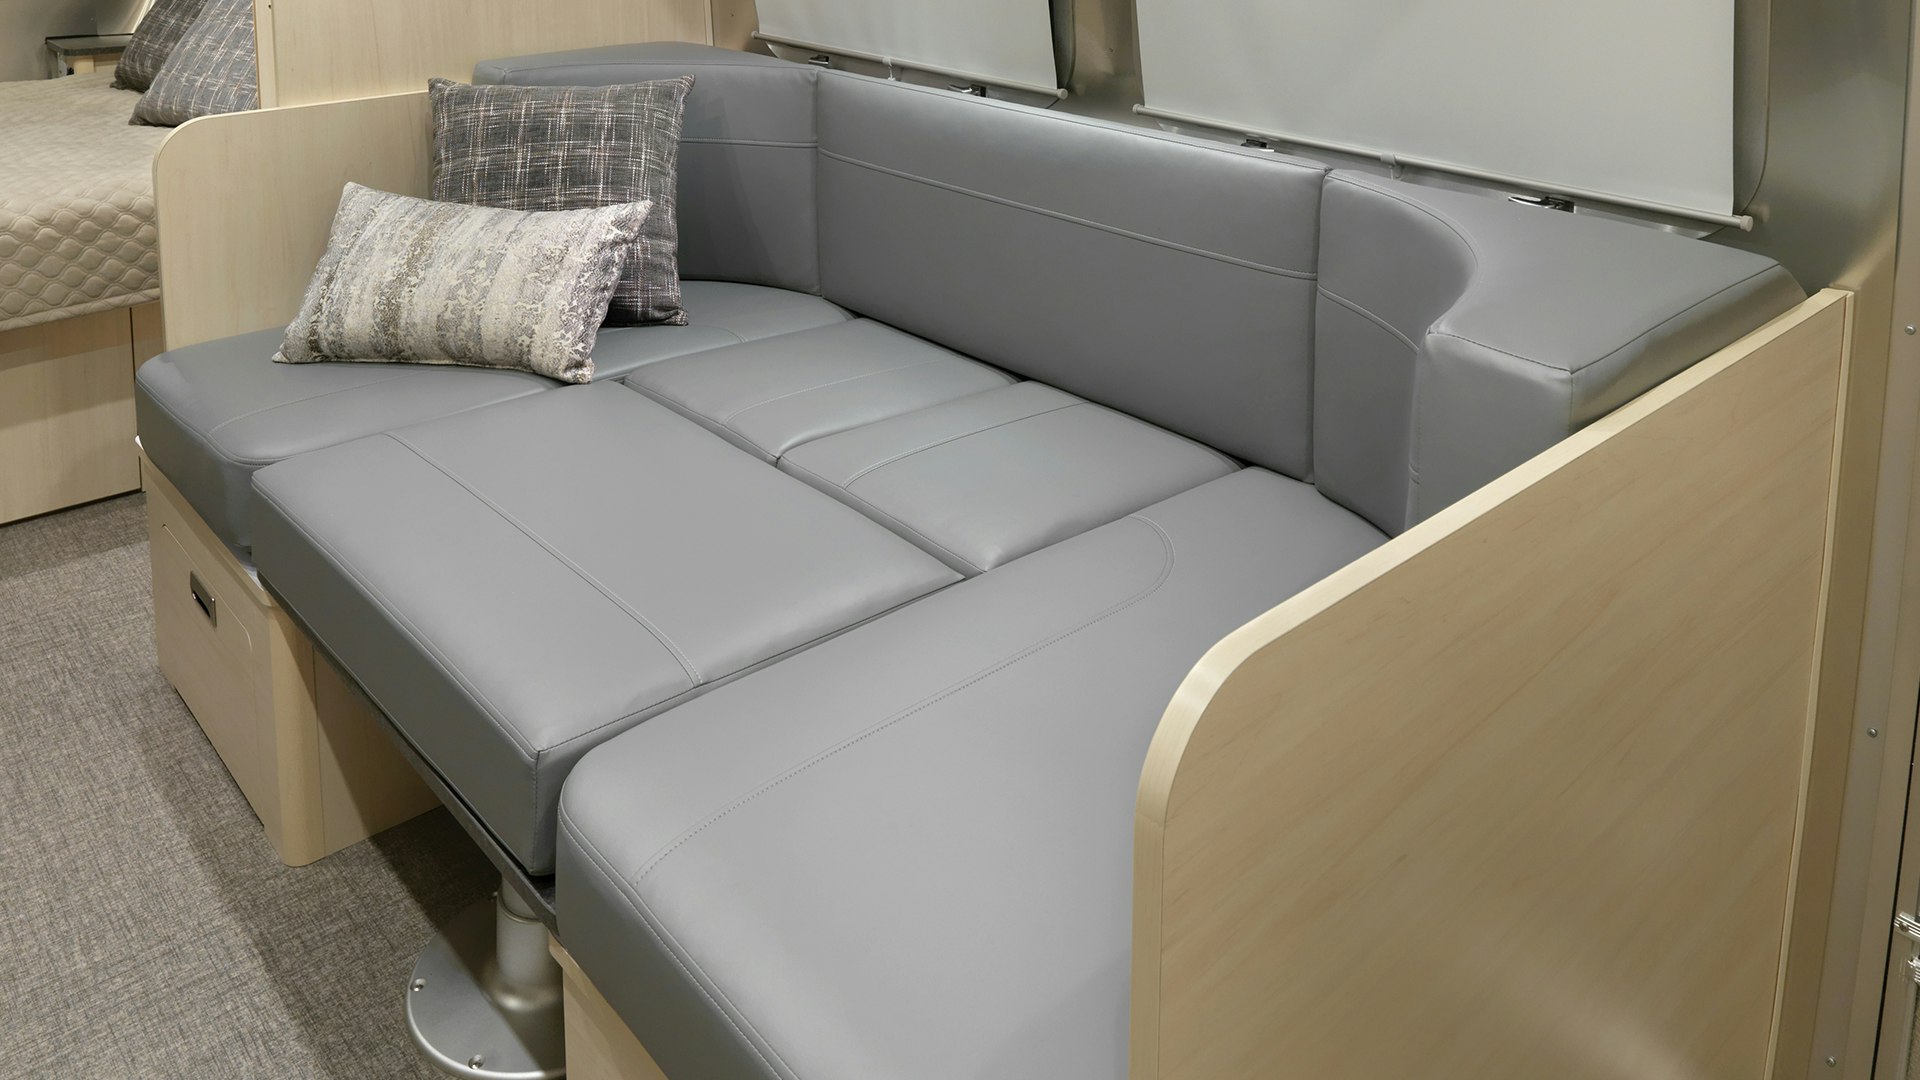 2021-Airstream-Flying-Cloud-Sunlit-Maple-Interior-with-Seattle-Mist-Ultraleather-Converted-Bed